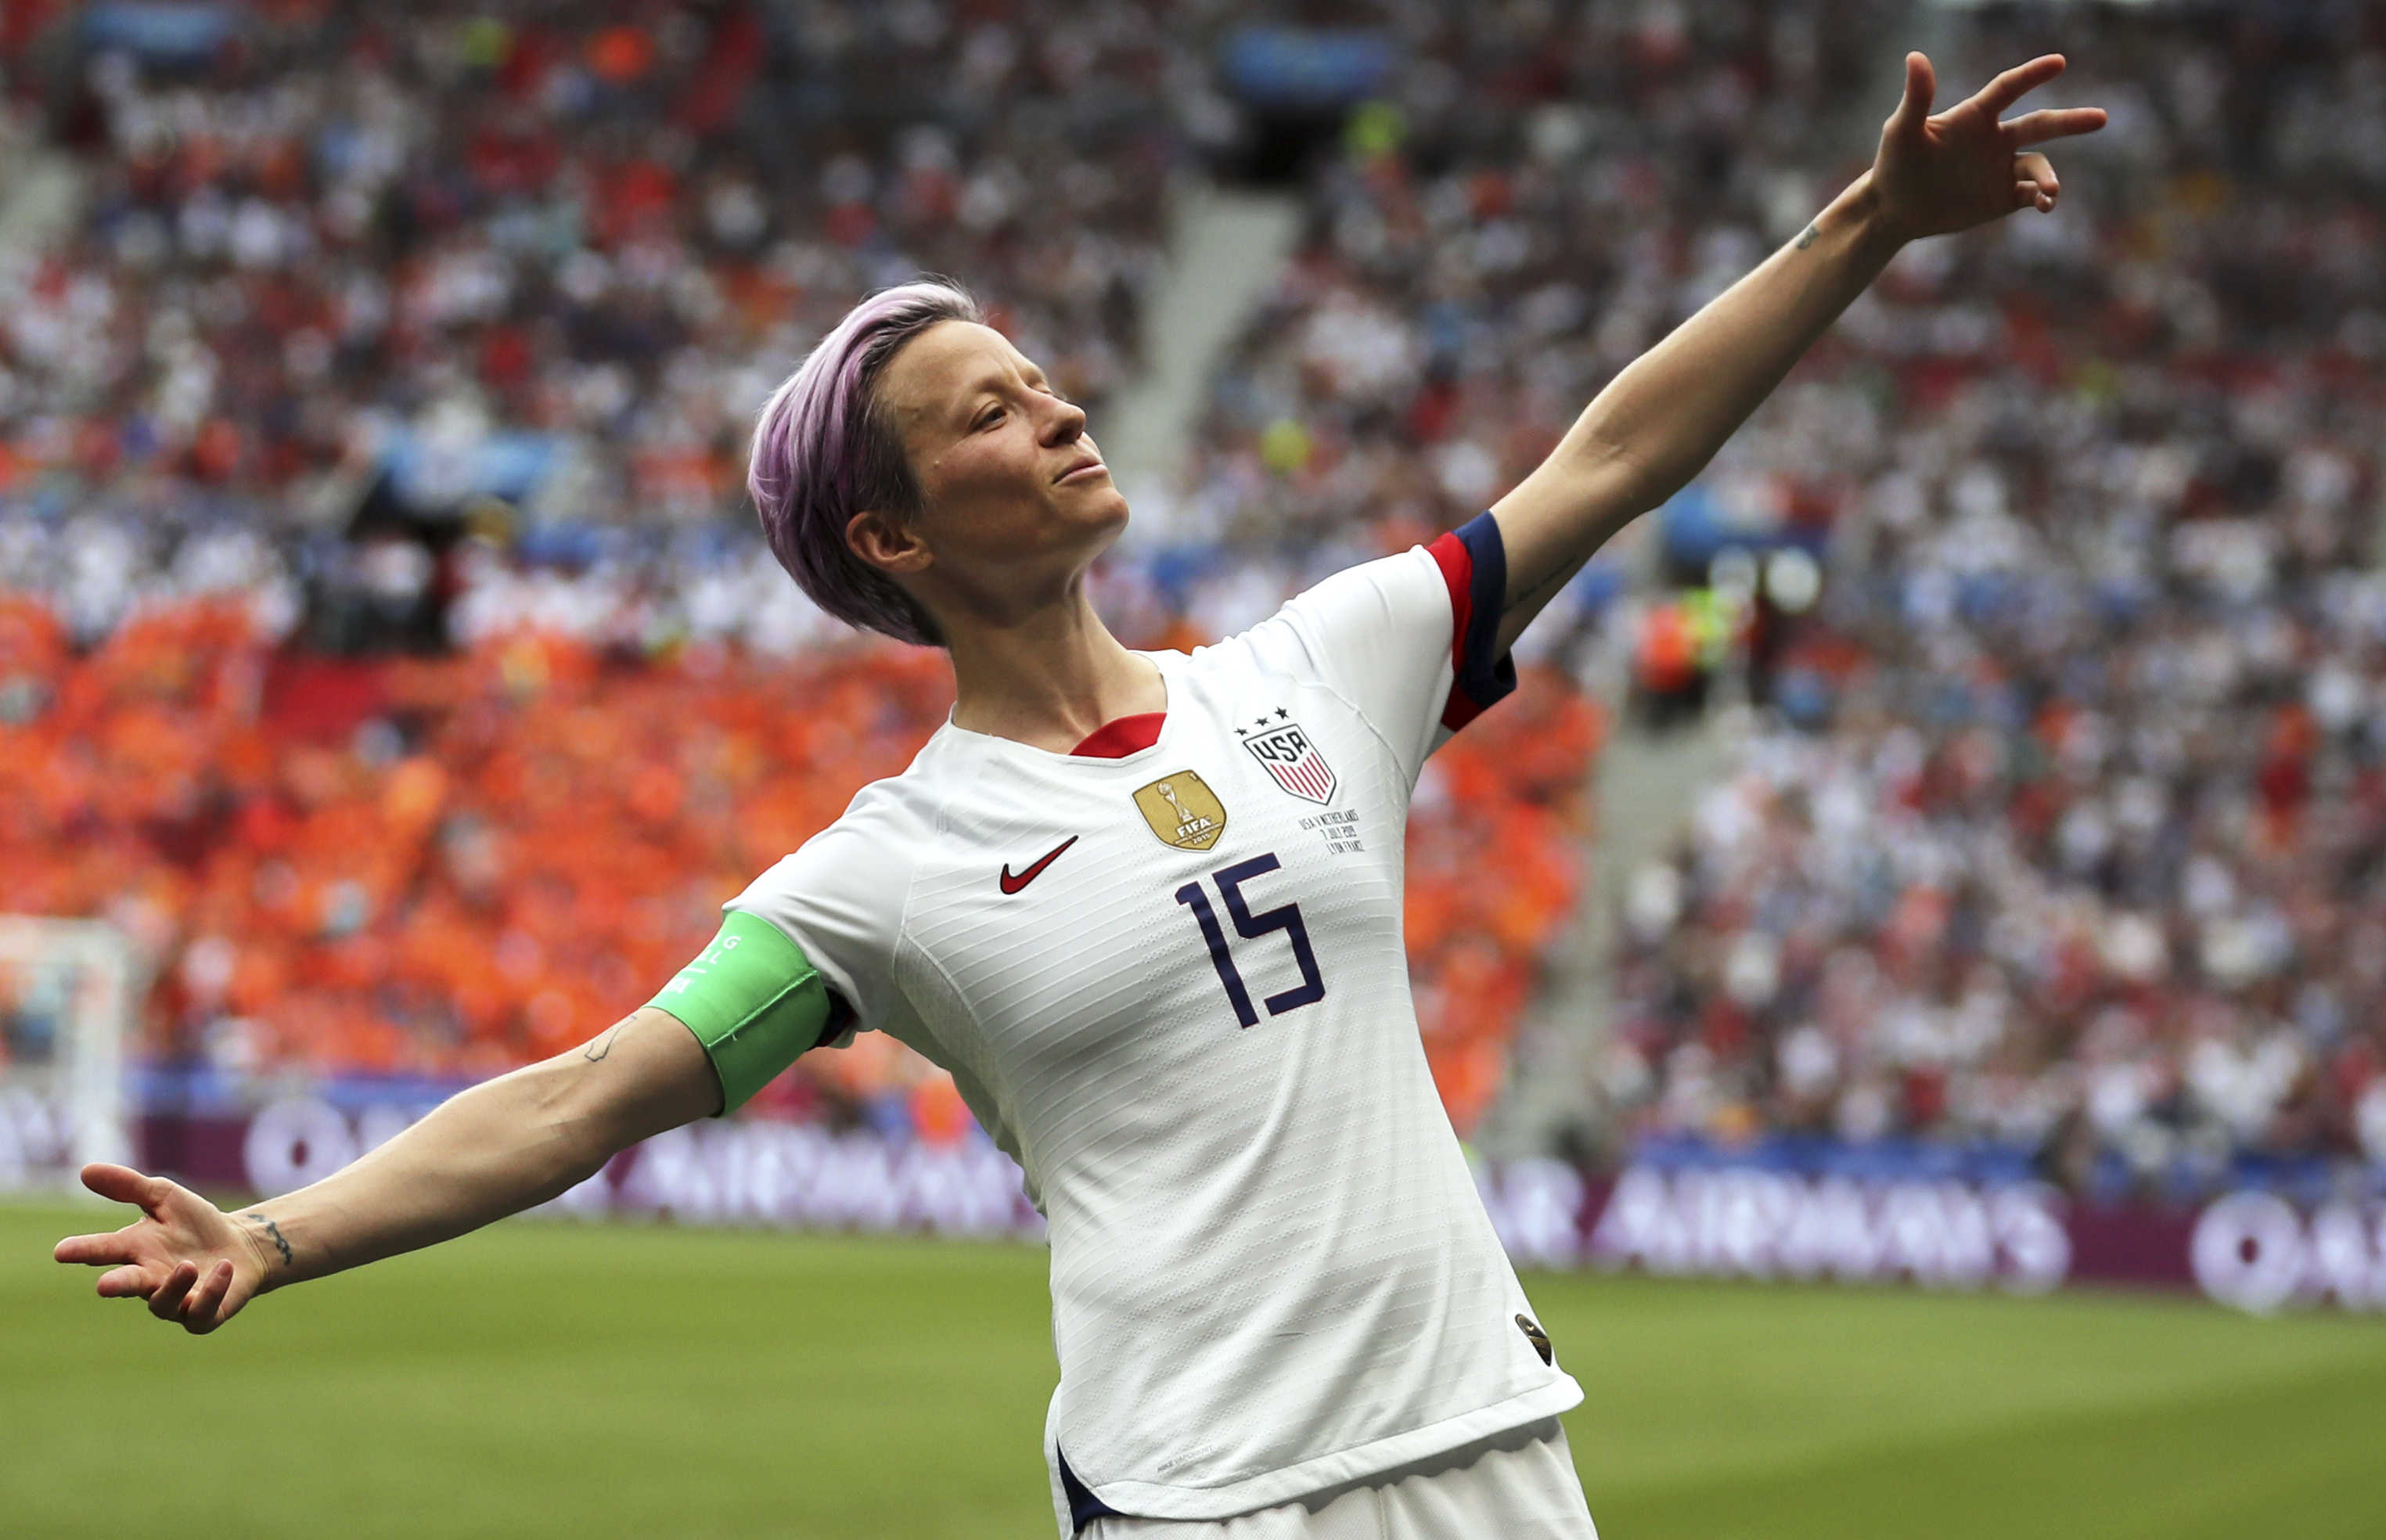 Which magazine named Megan Rapinoe as their 2019 Sportsperson of the Year?